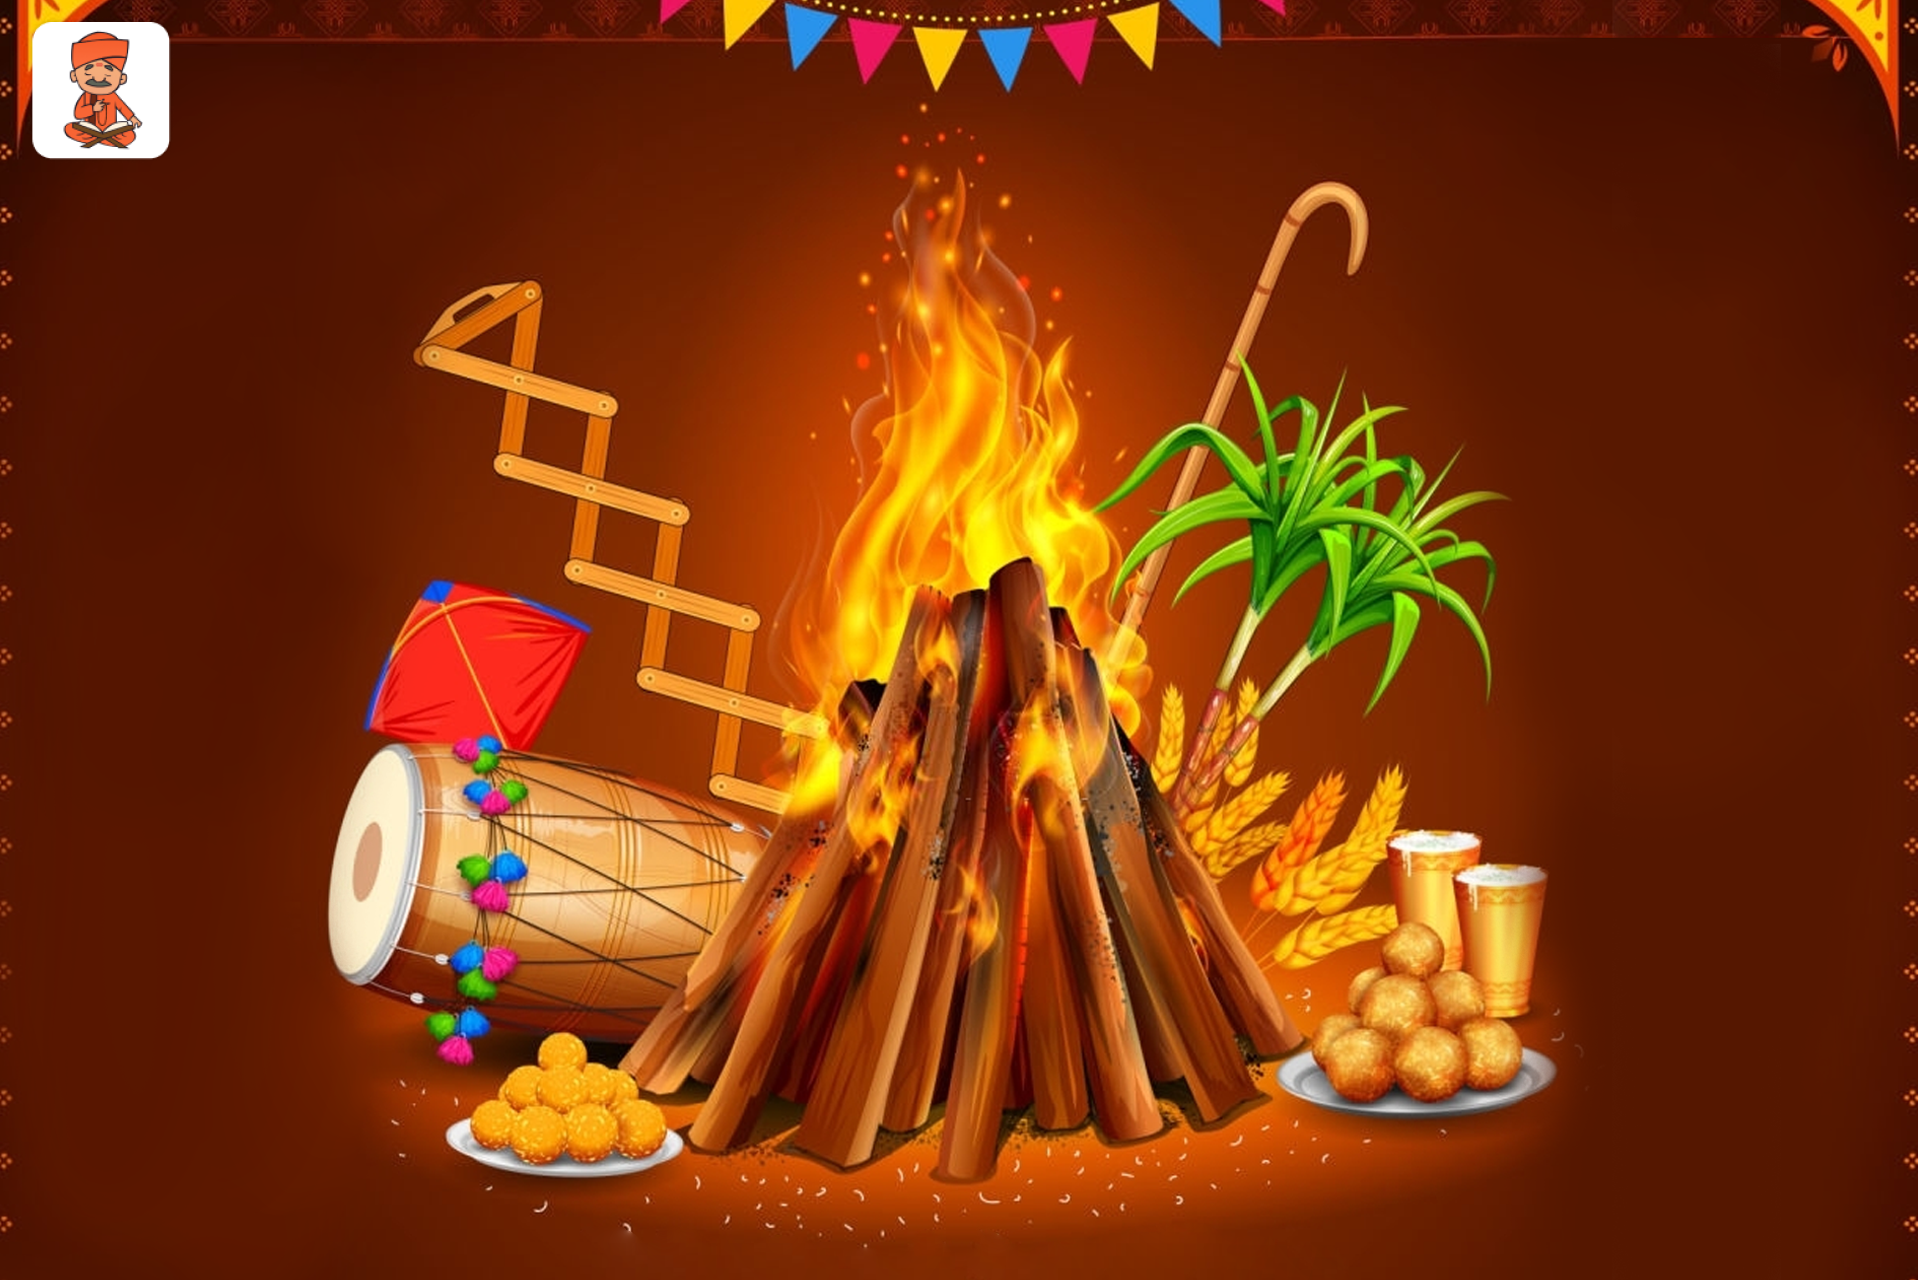 Lohri 2022: Know What Is The Festival Of Lohri And Its Tradition